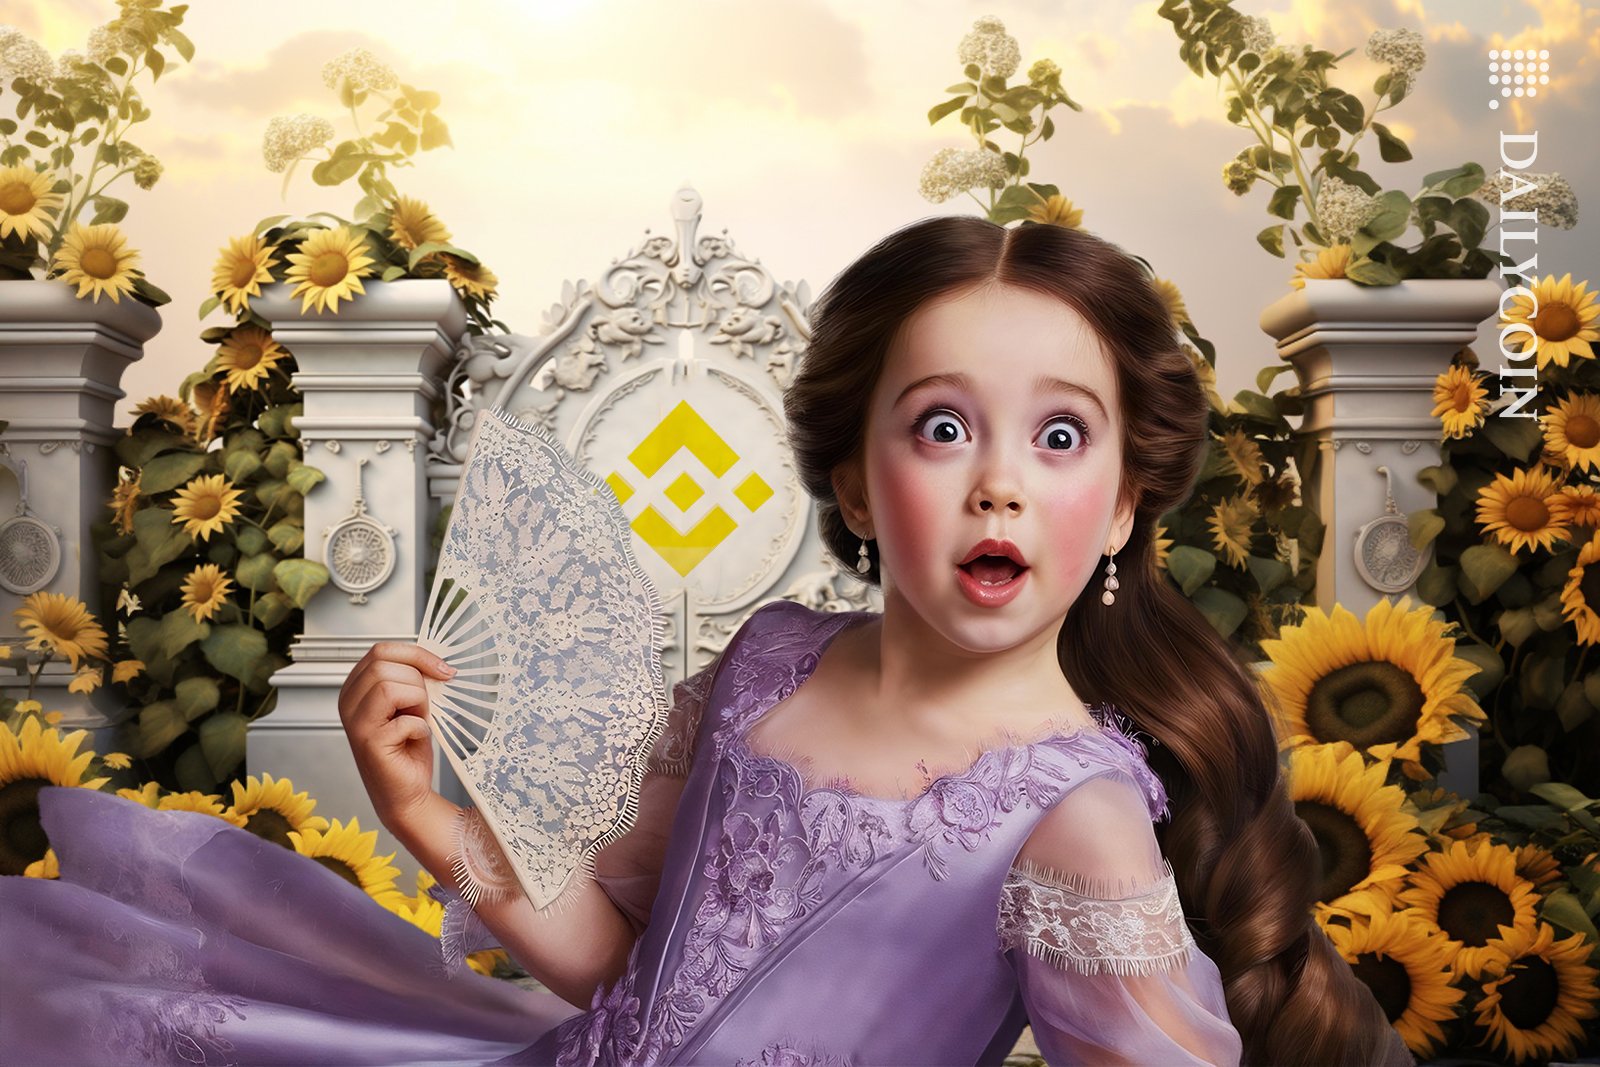 Surprised Victorian girl surrounded by sunglowers by the gates of Binance BNB.